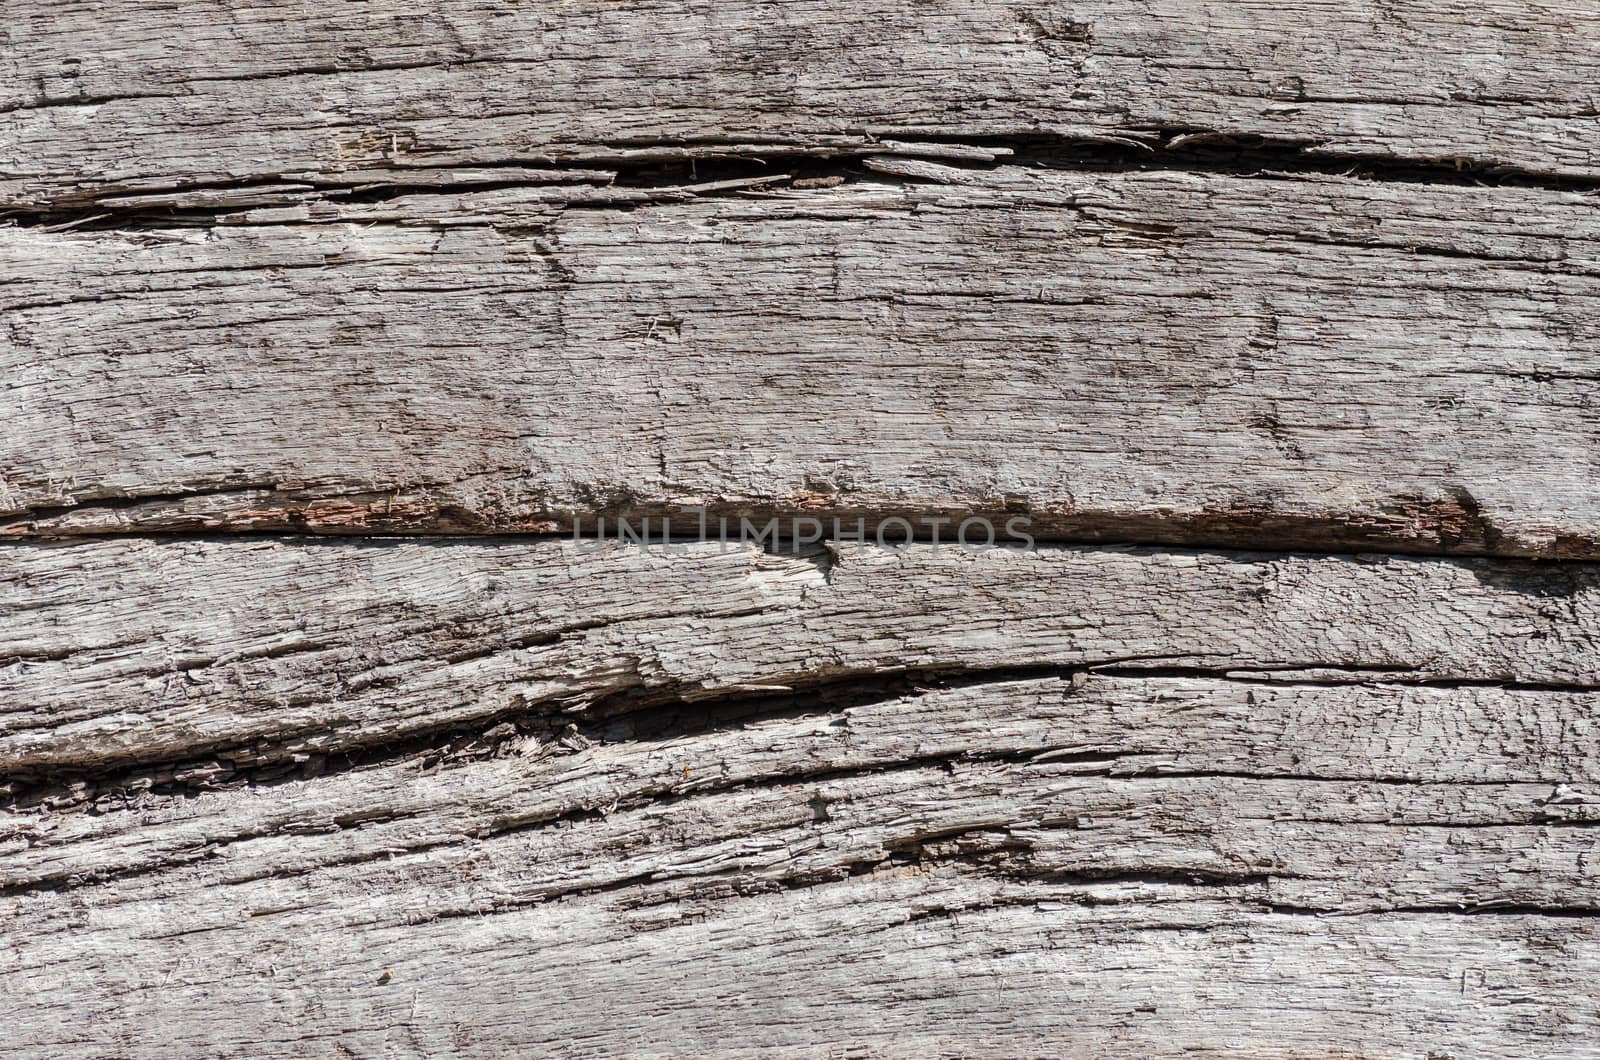 Background pattern of a wooden railroad tie.
